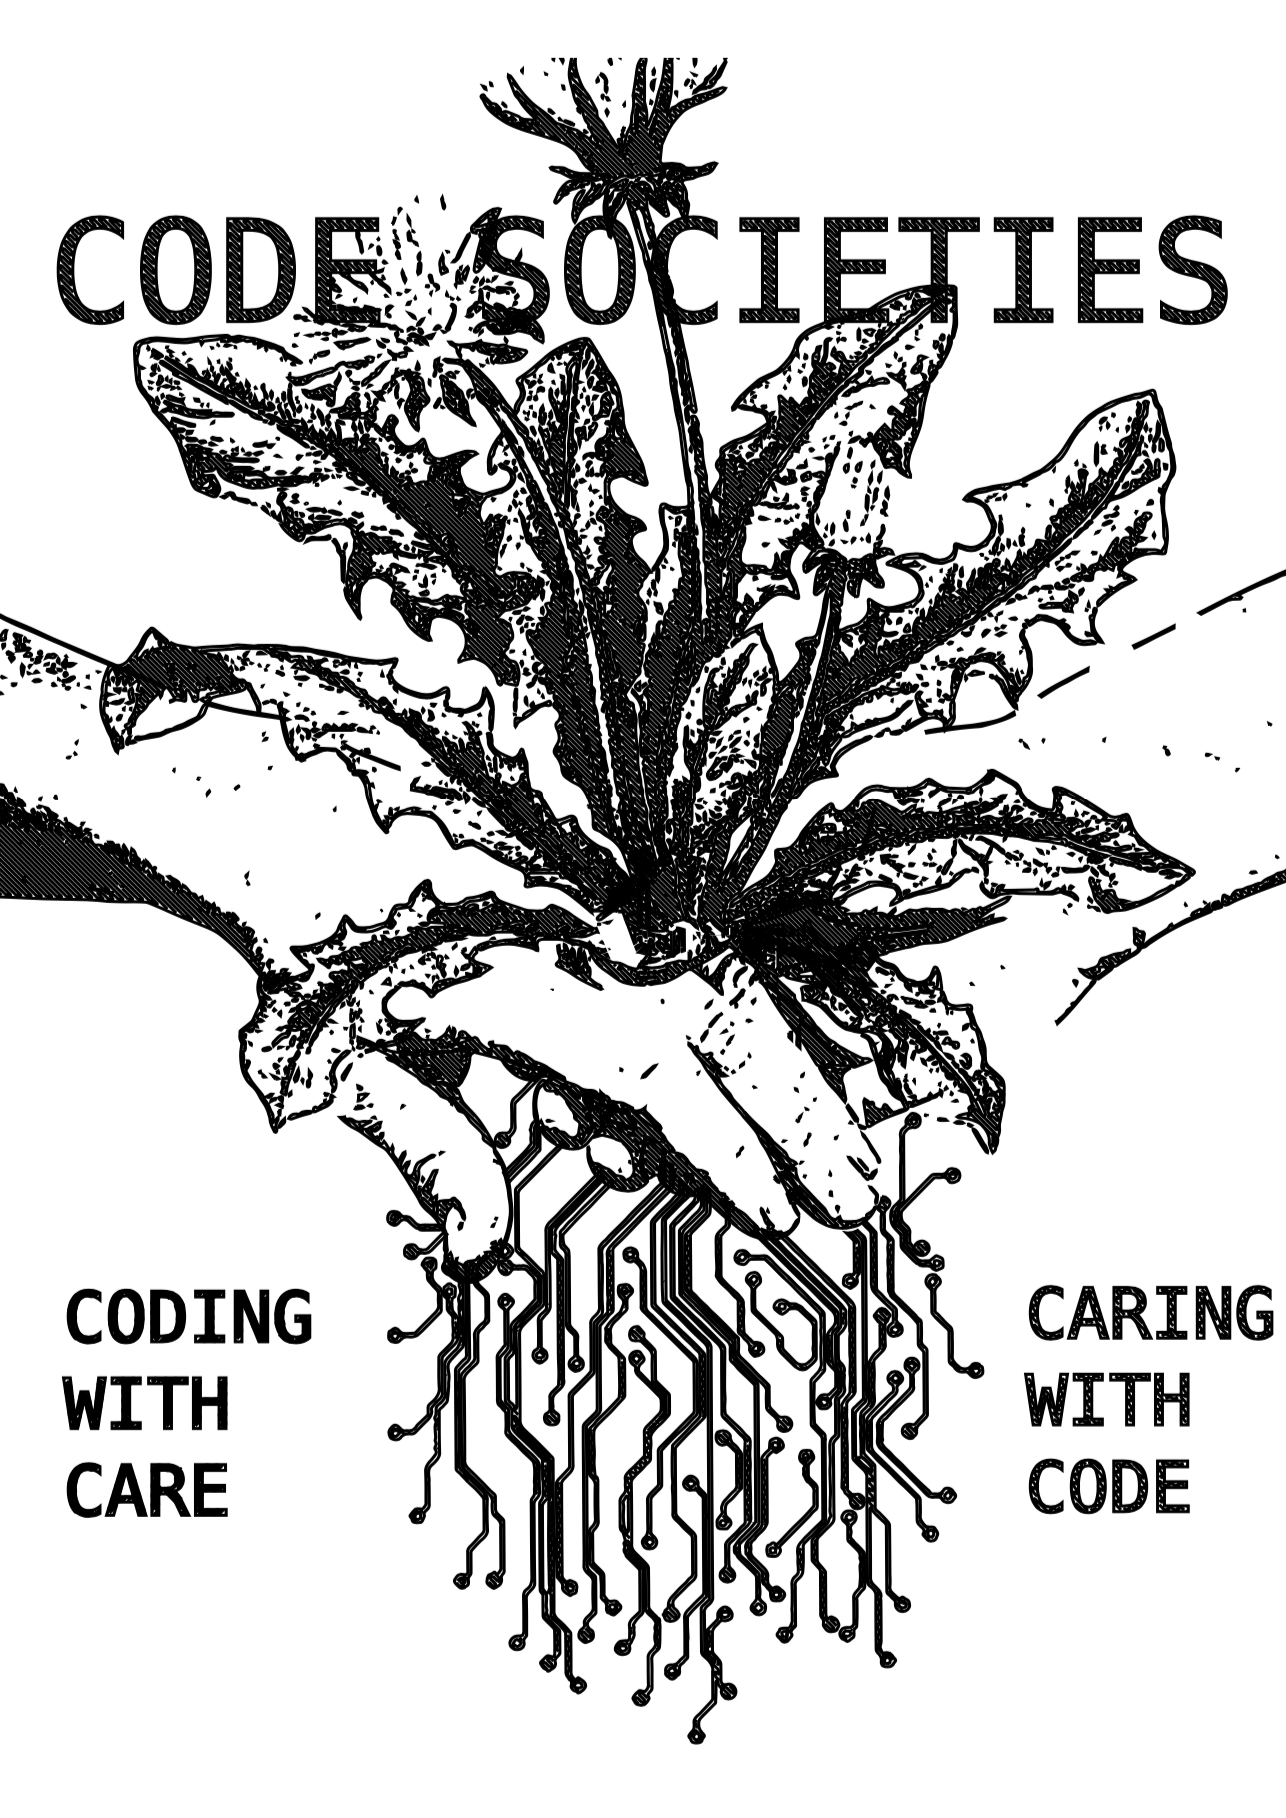 Code Societies plotter drawing by AC Gillette 2019